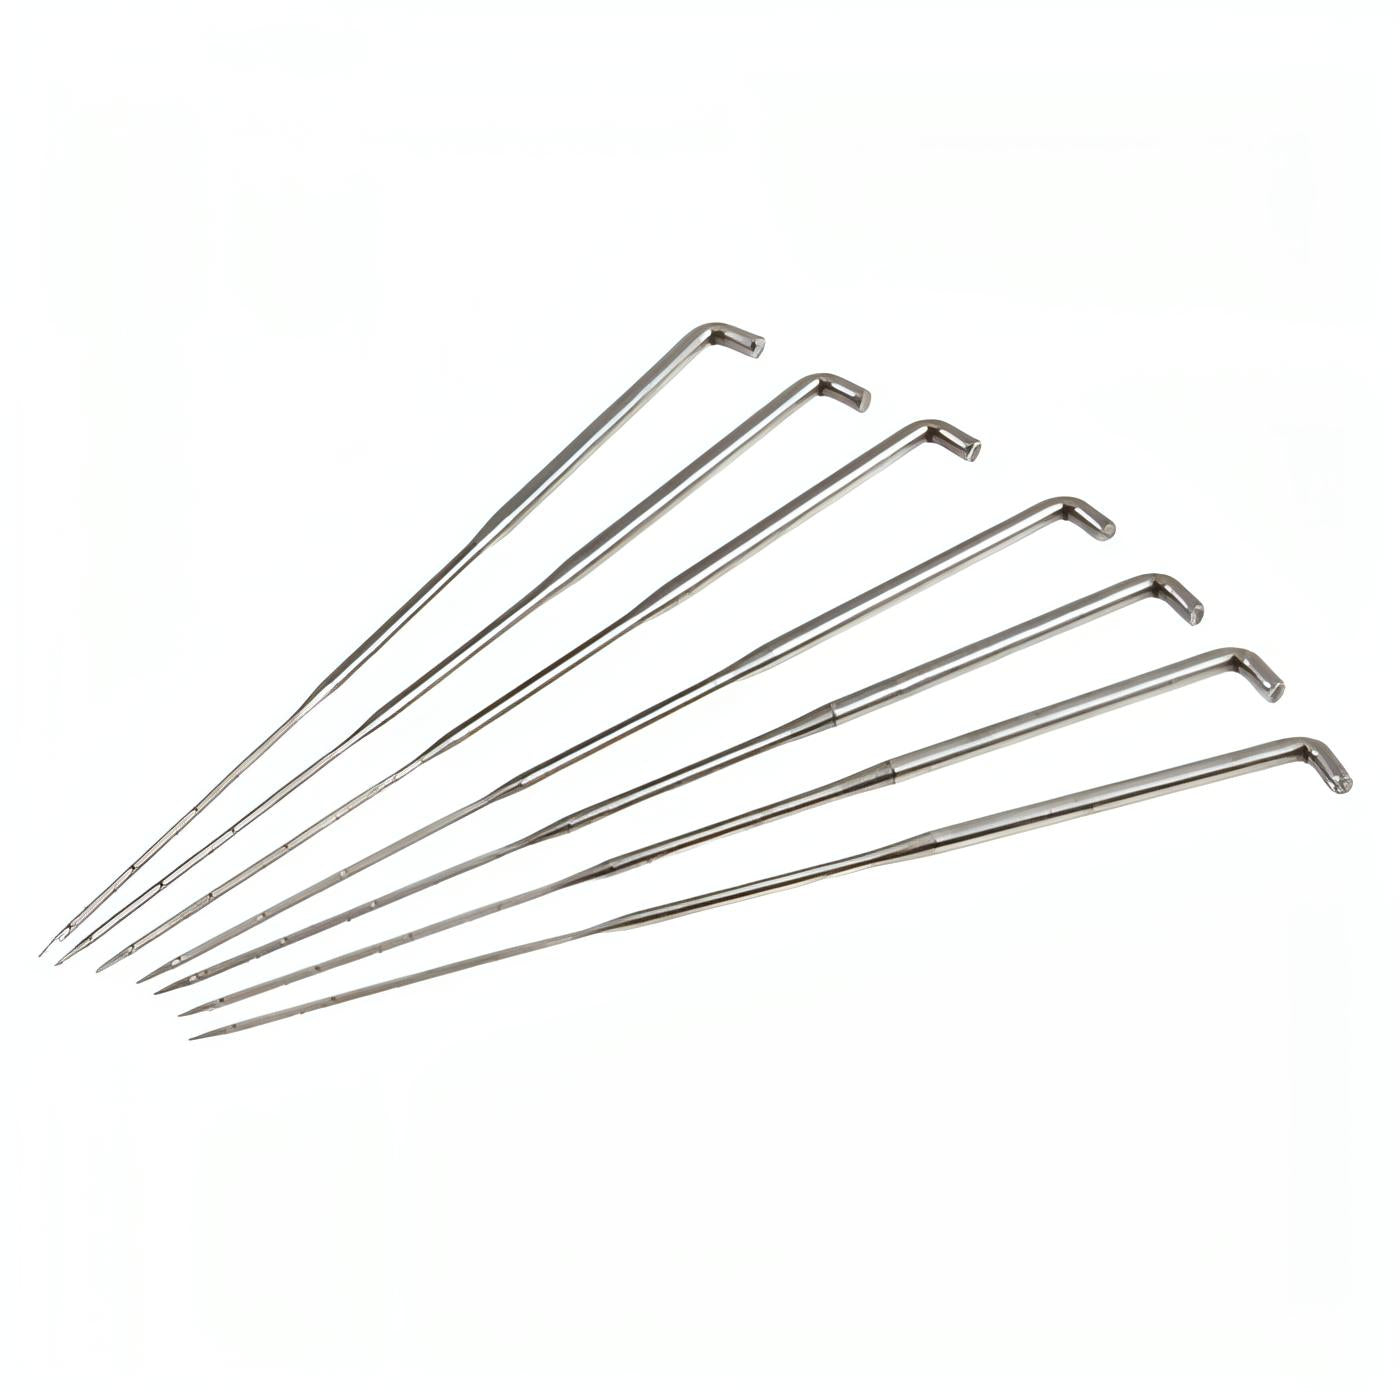 Replacement Felting Needles - 7 Pack